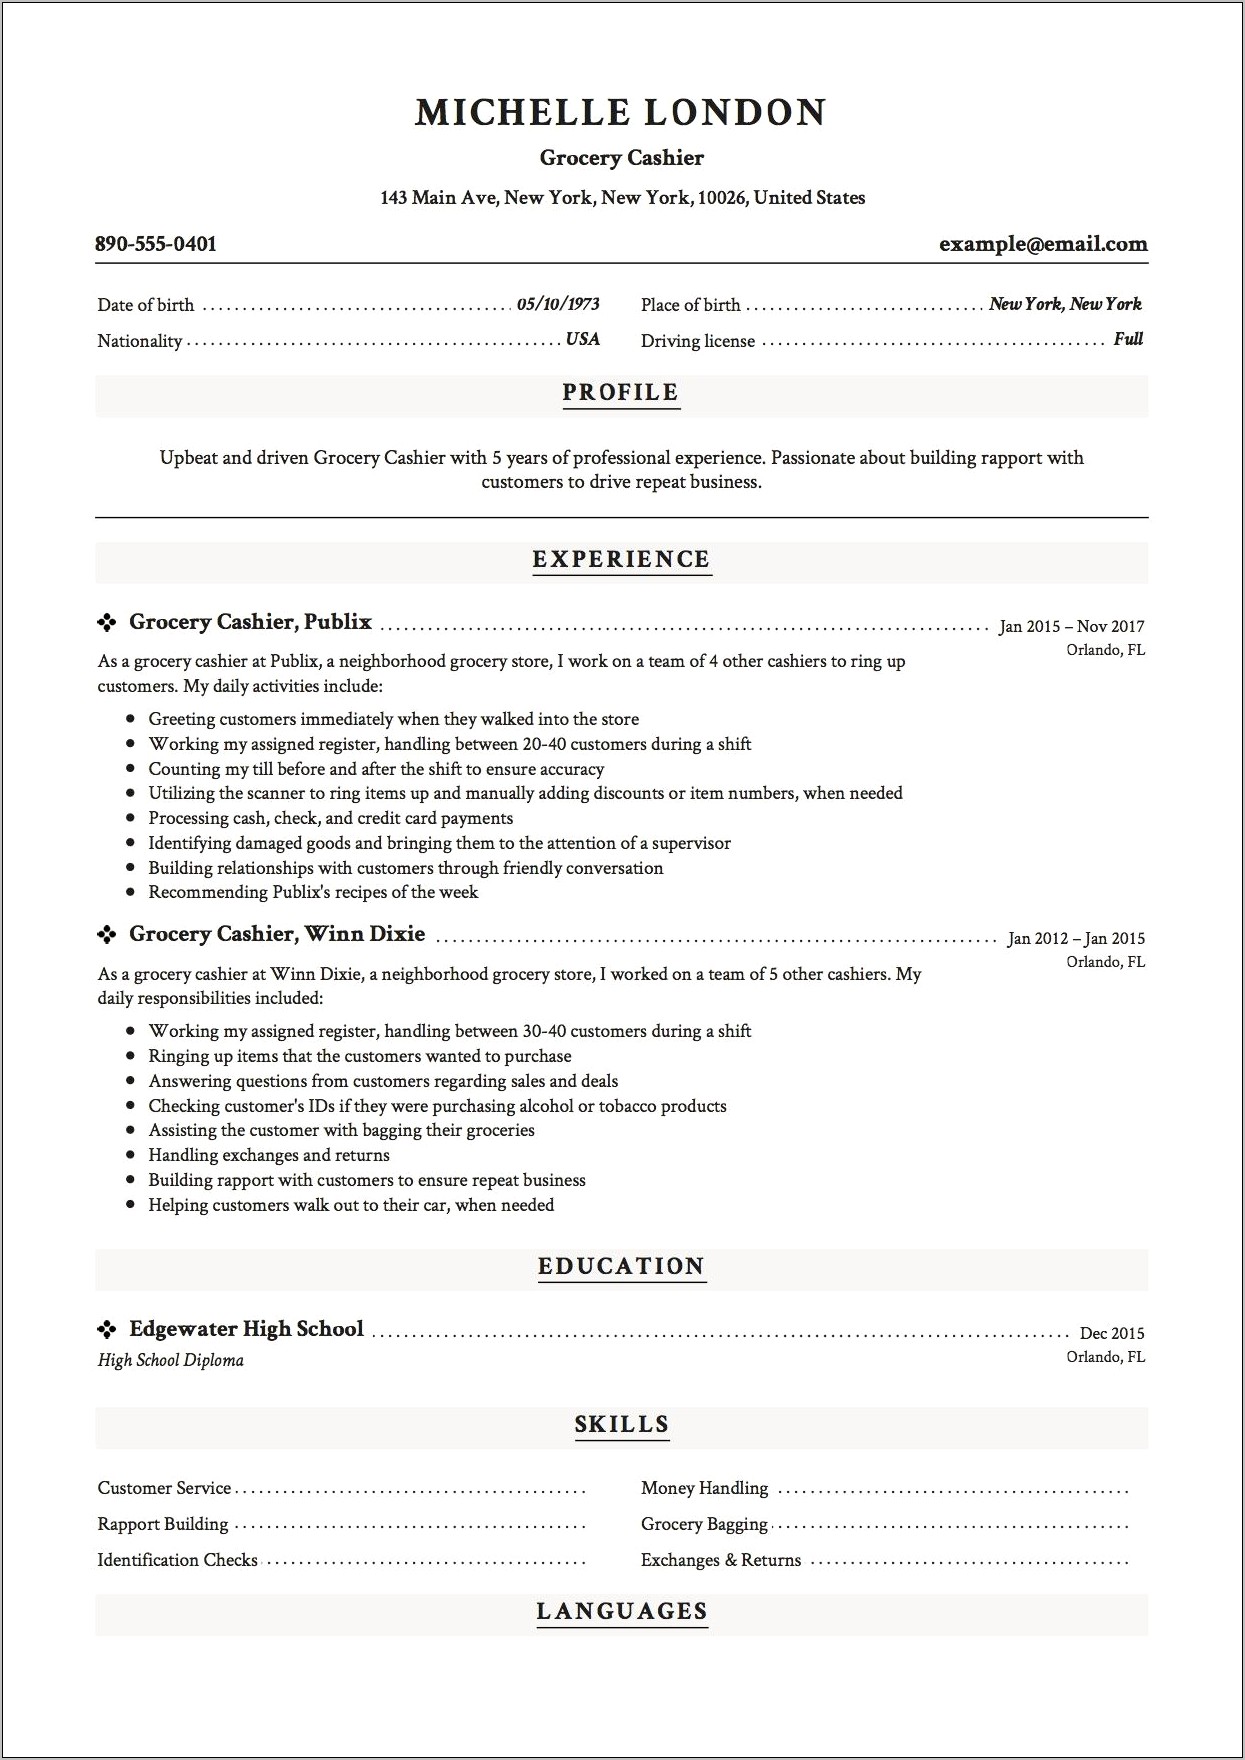 Sample Resumes For Cashier In A Grocery Store